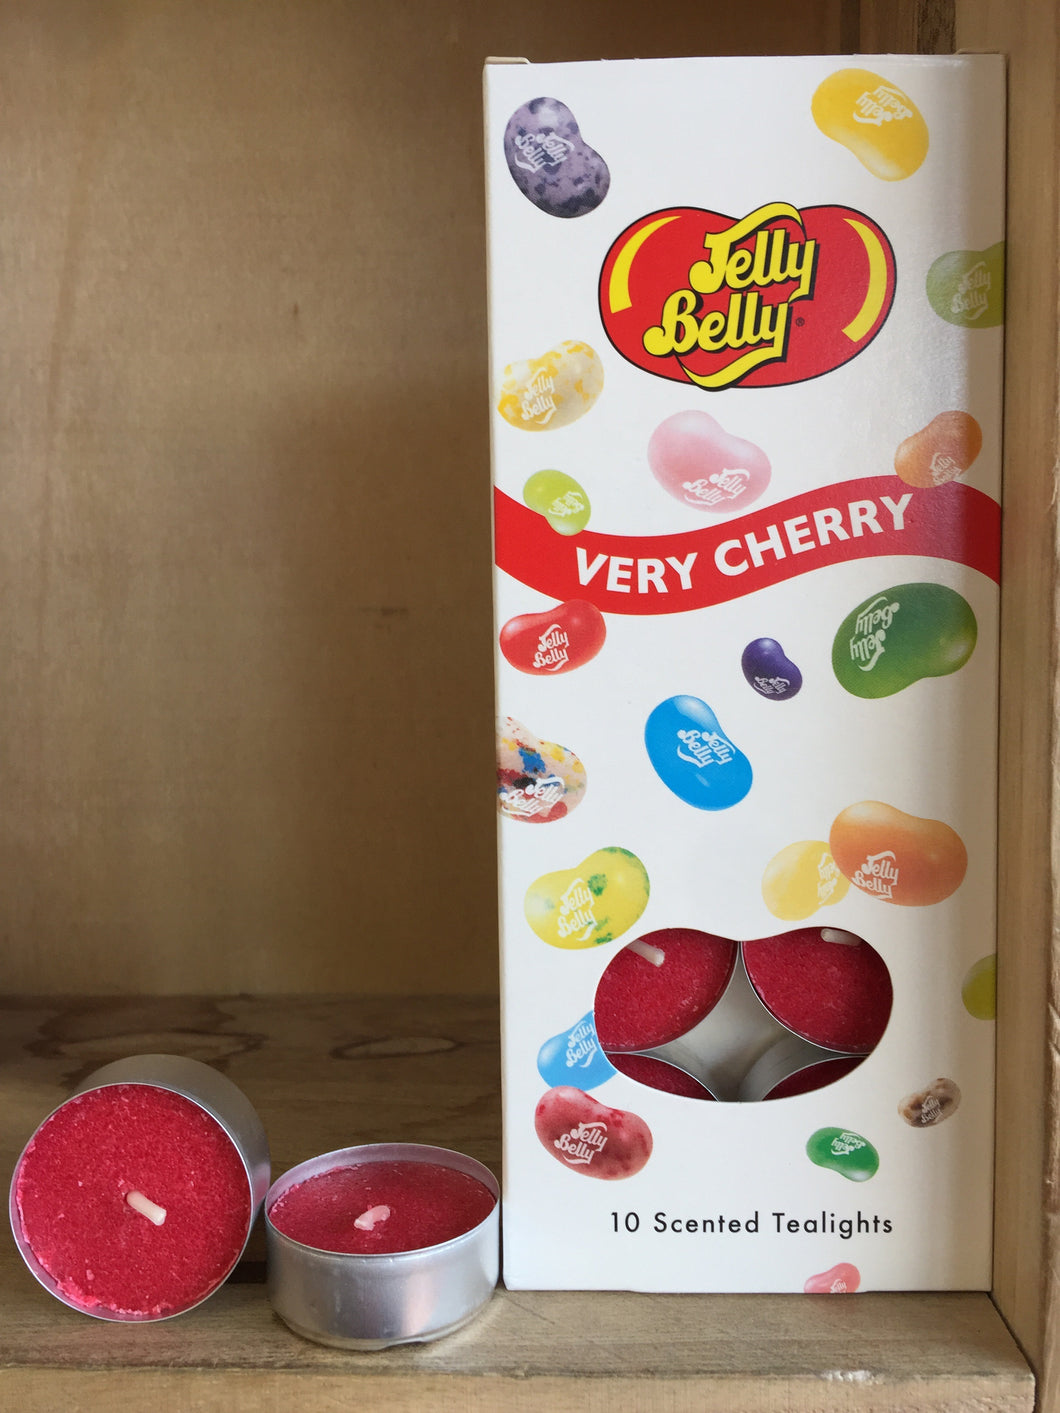 Jelly Belly Very Cherry 10 Scented Tealights